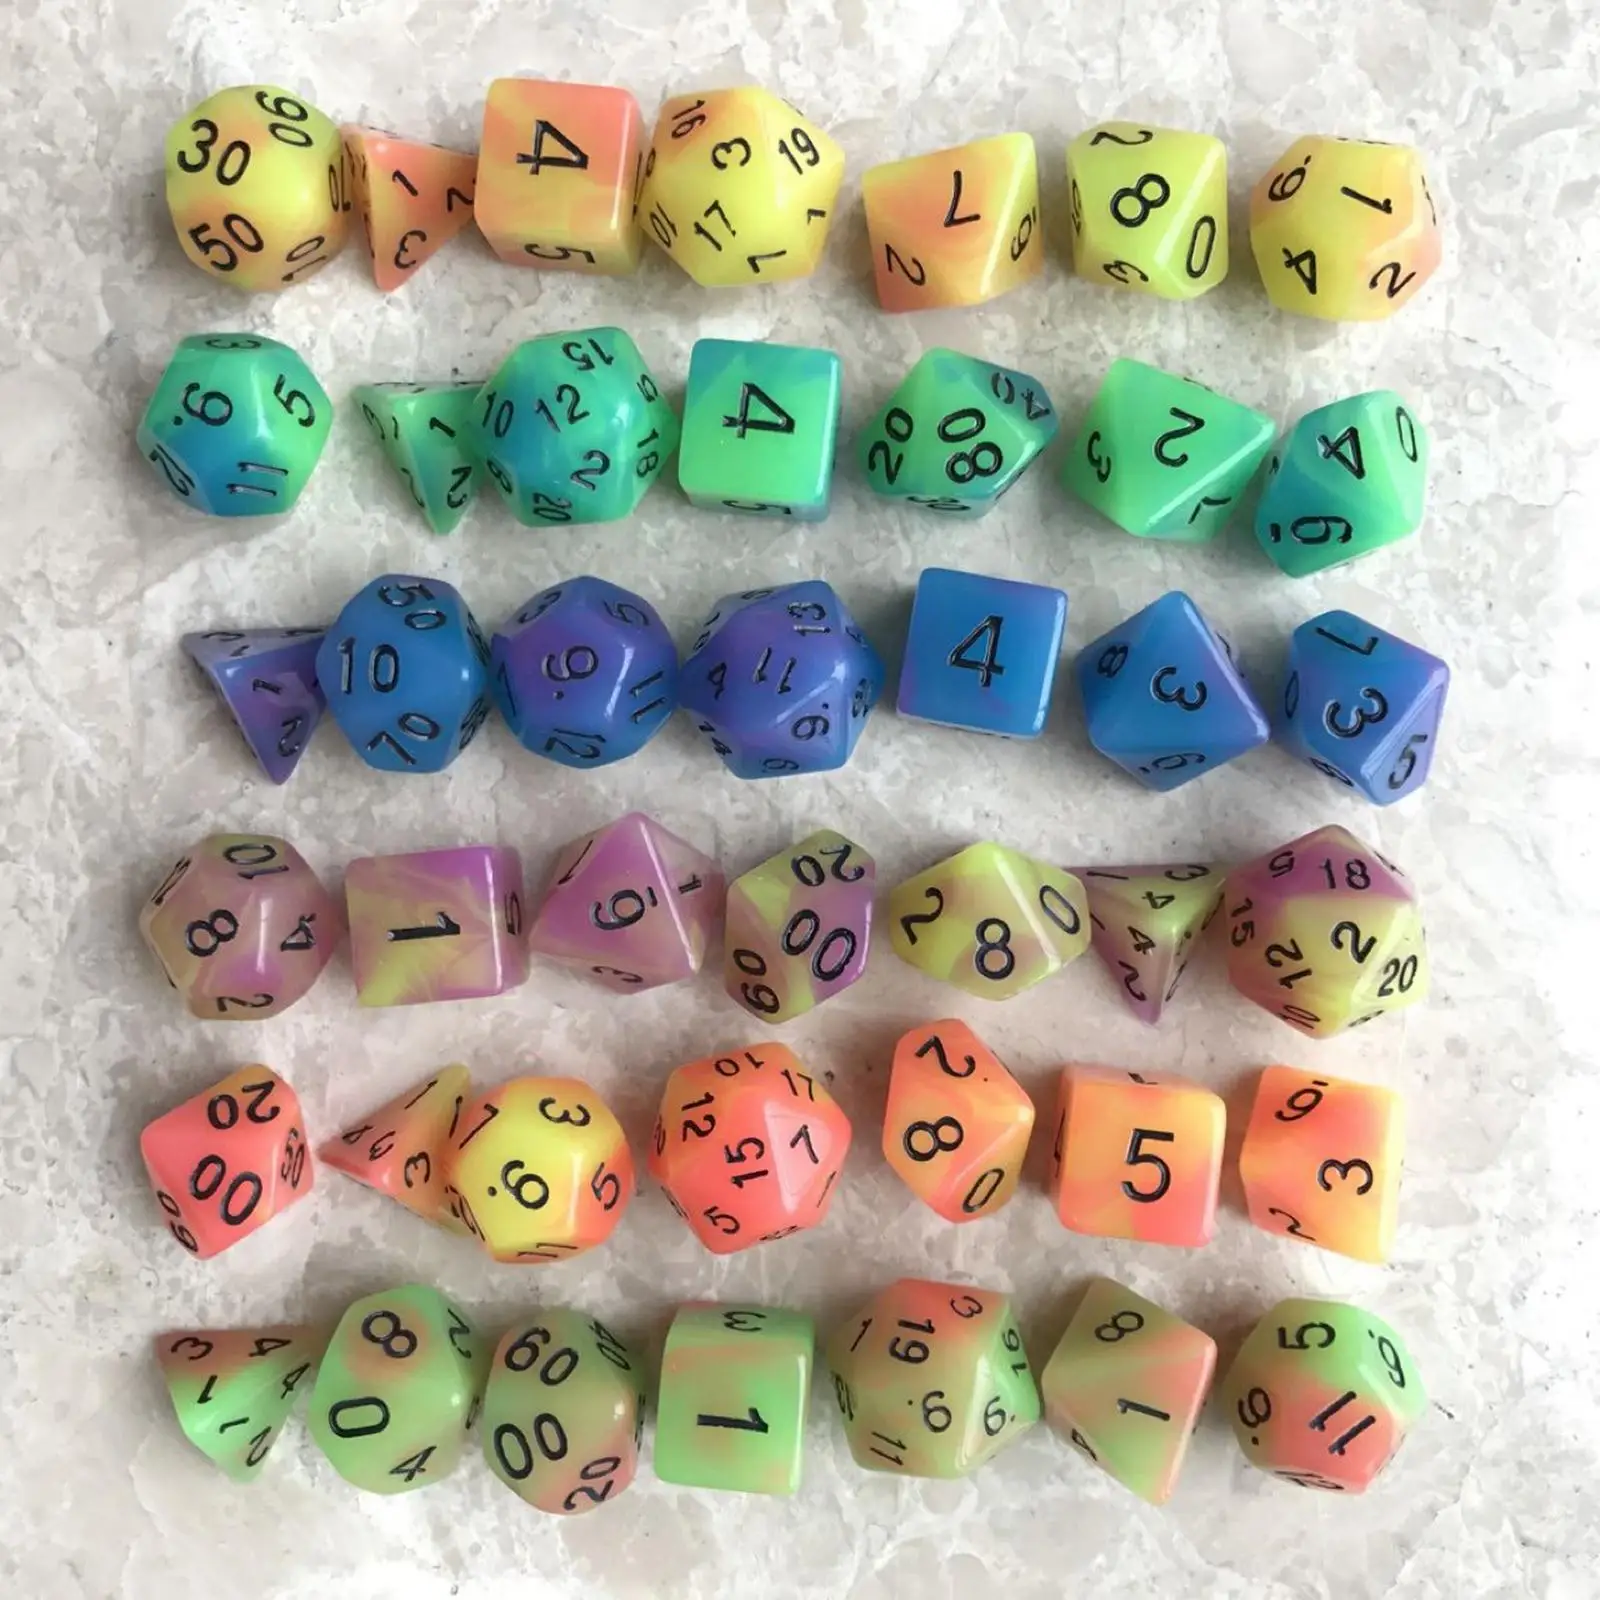 Luminous RPG Dice Set Bar Toys Glowing Polyhedral Dices Set for MTG